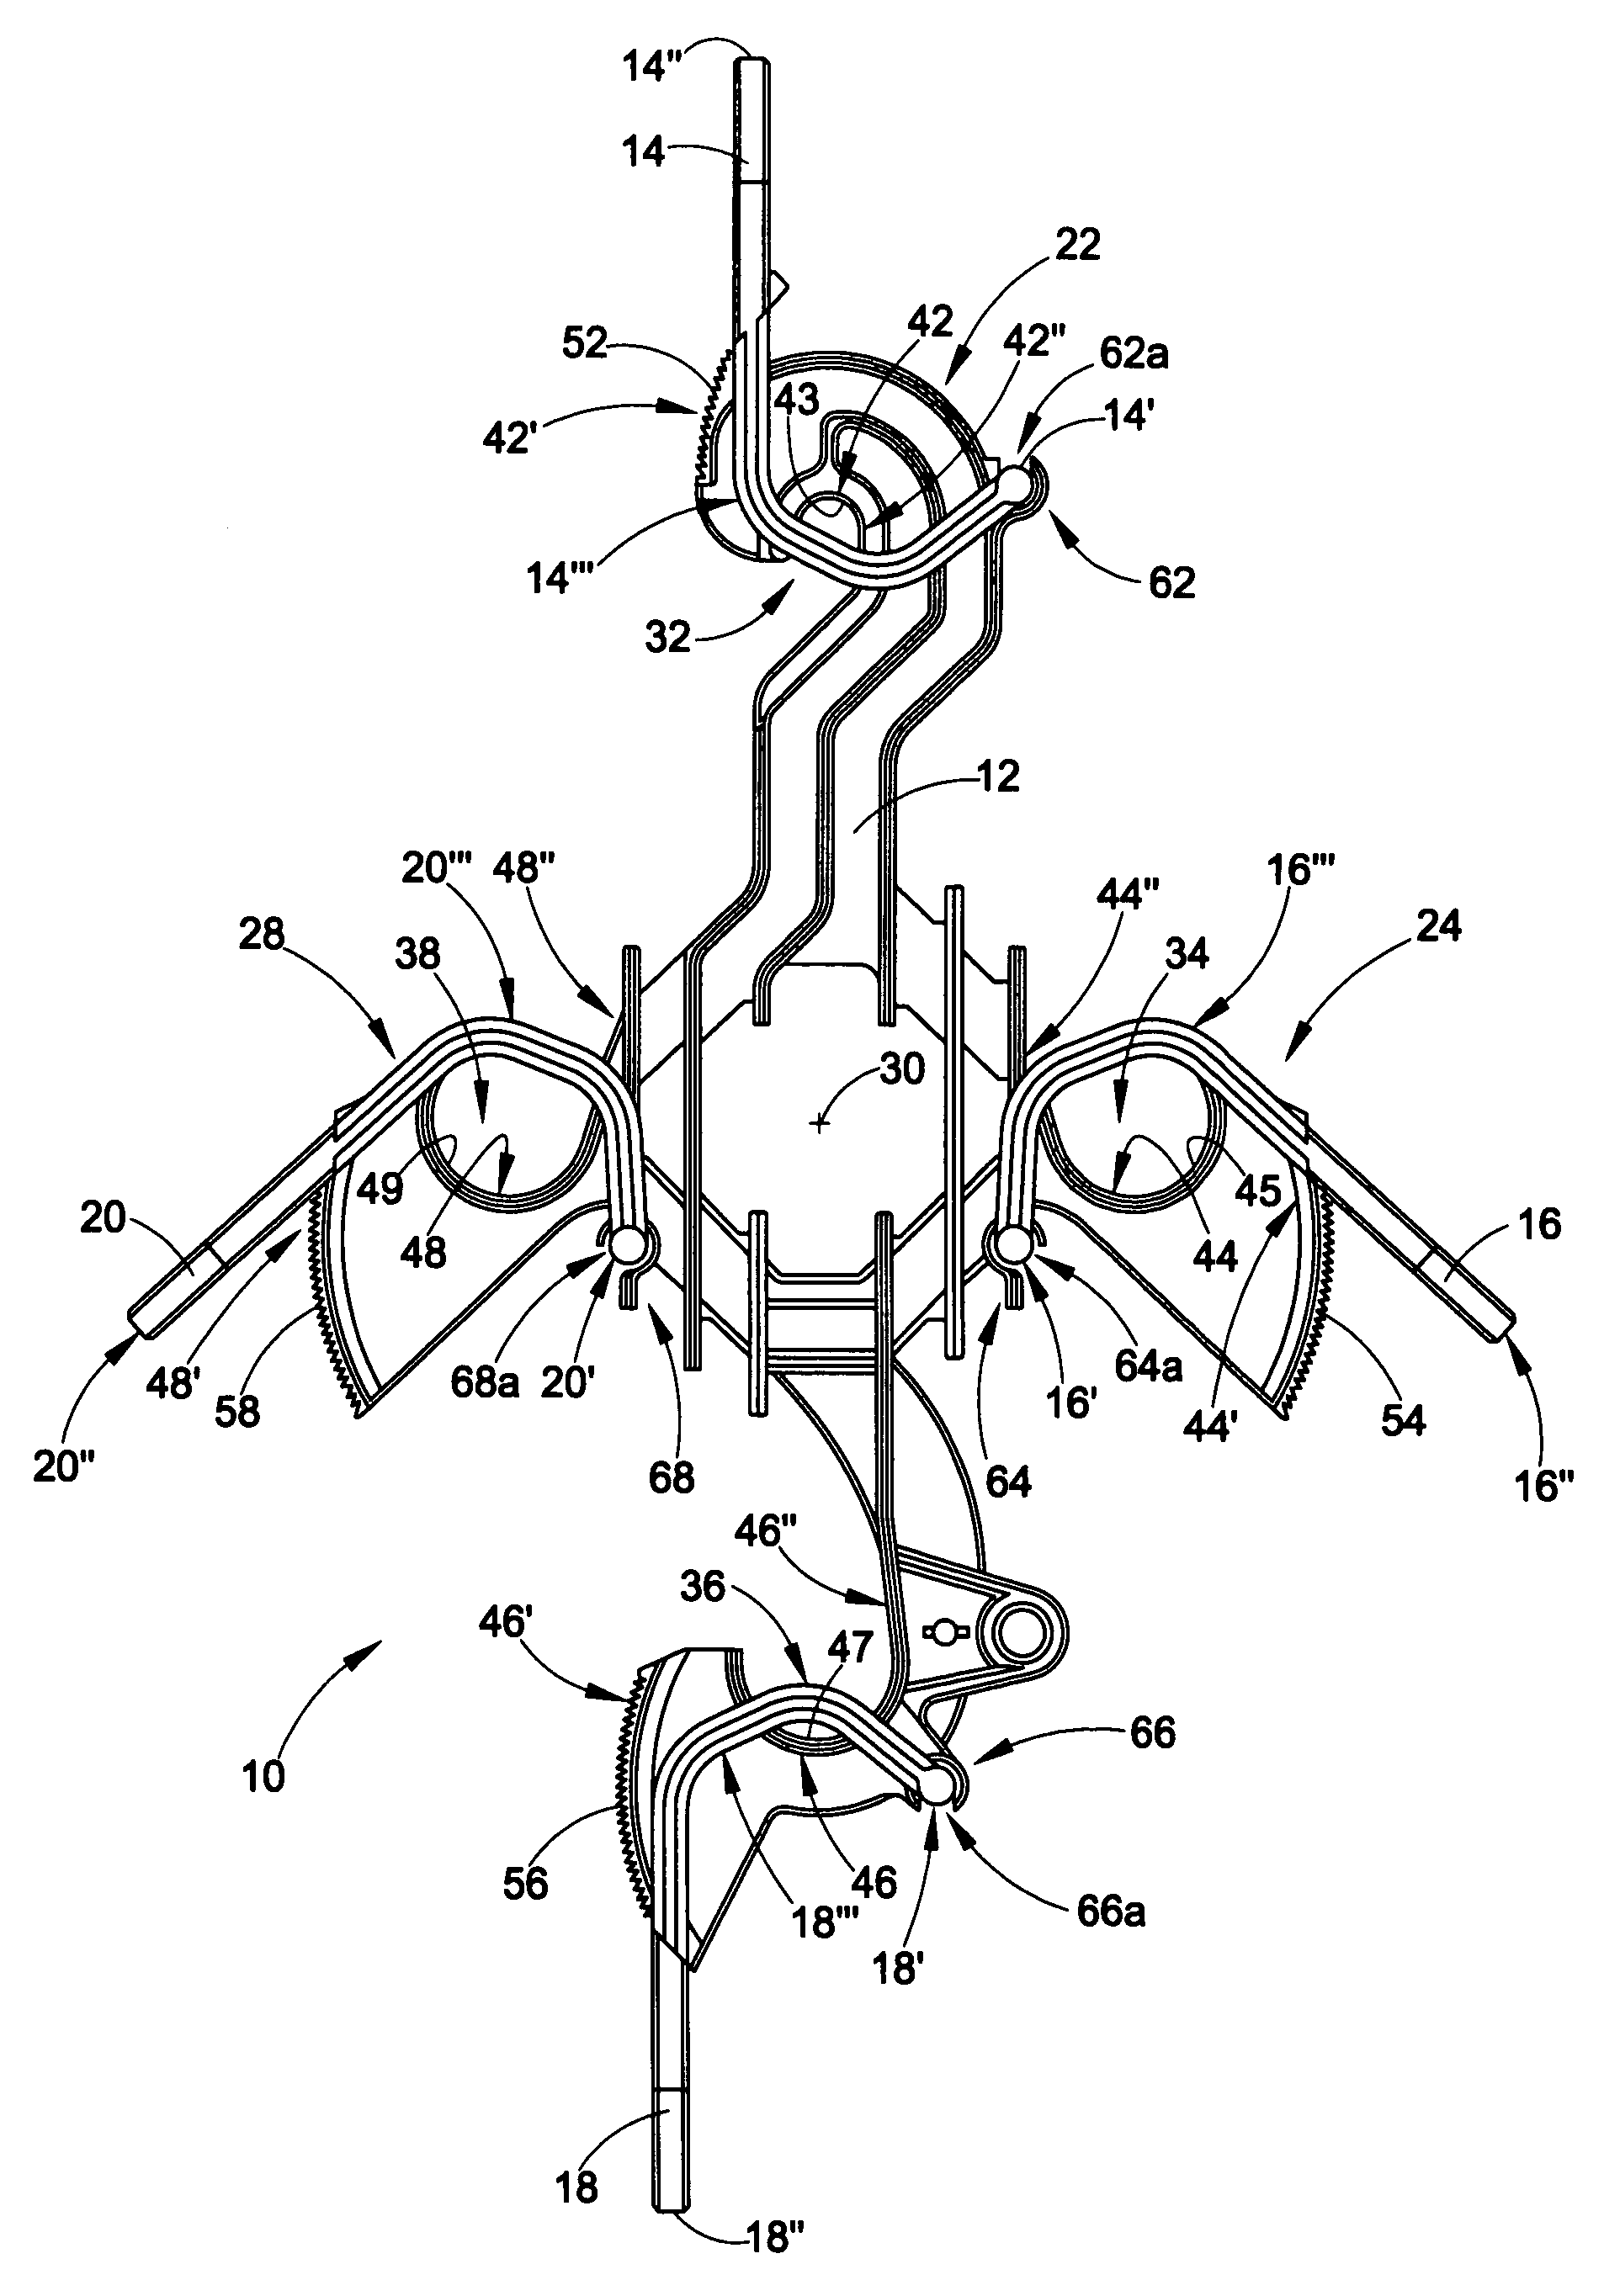 Aerial cable spacer with cable retaining arm having non-rectangular plus-shaped cross section and angled pawl locking member